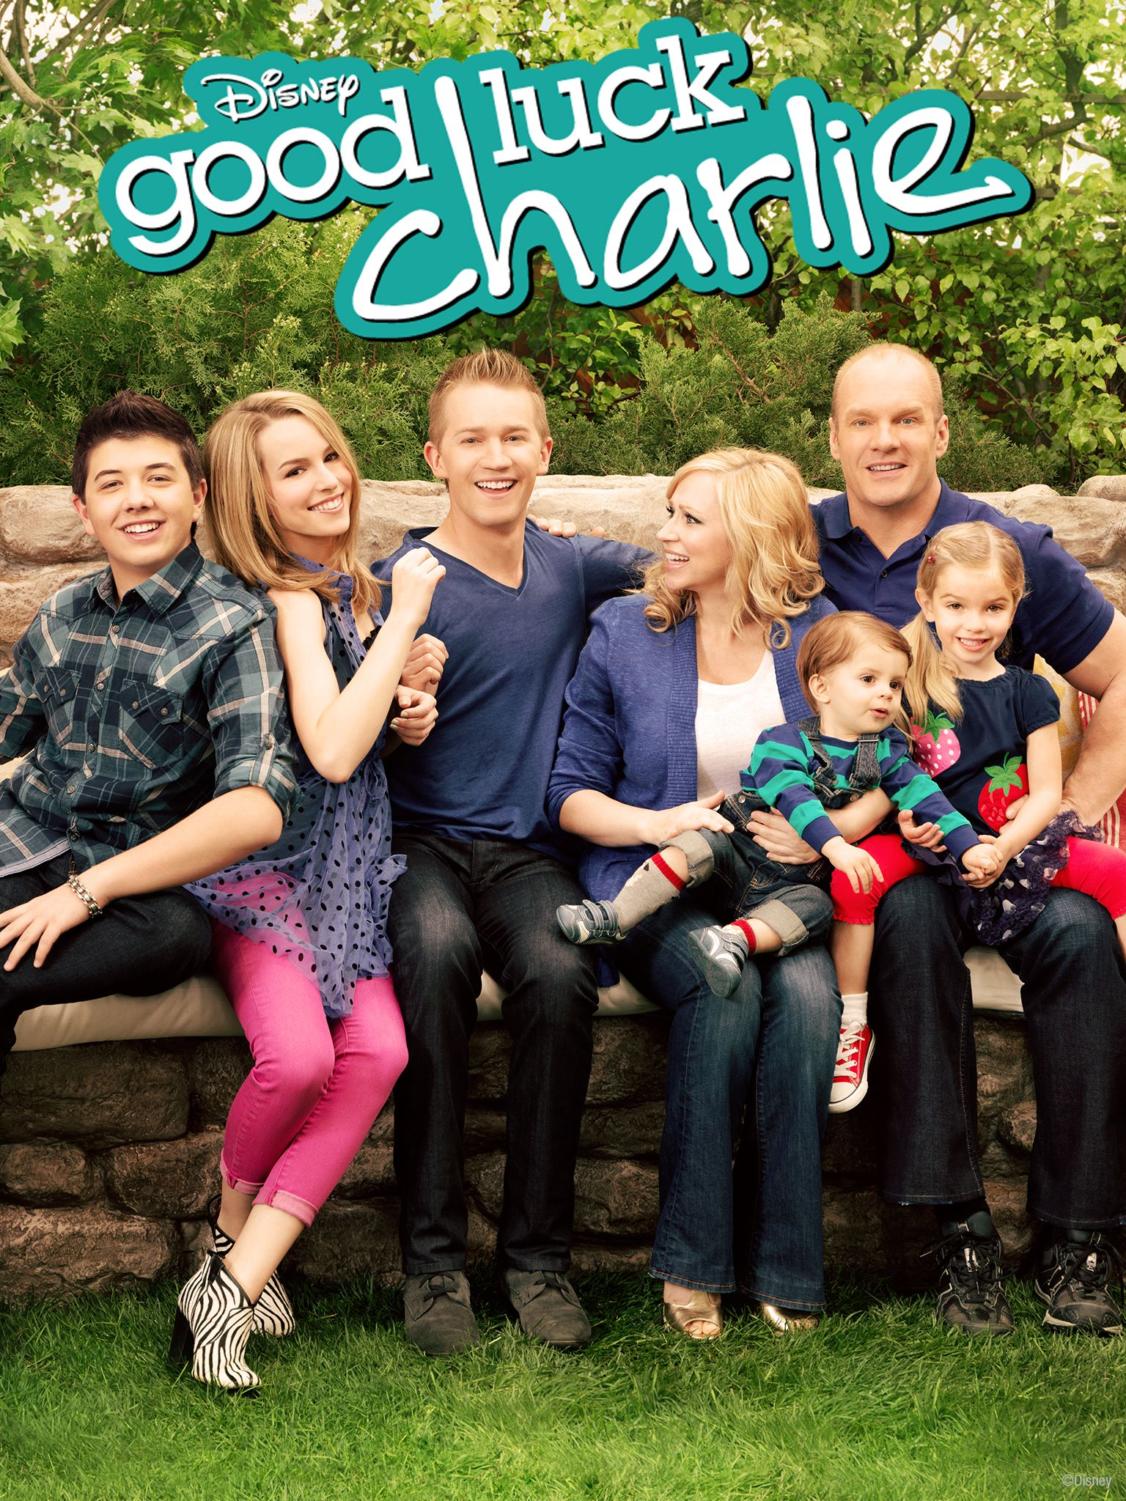 Good Luck Charlie, one of my favorite Disney shows taken off of Netflix. 